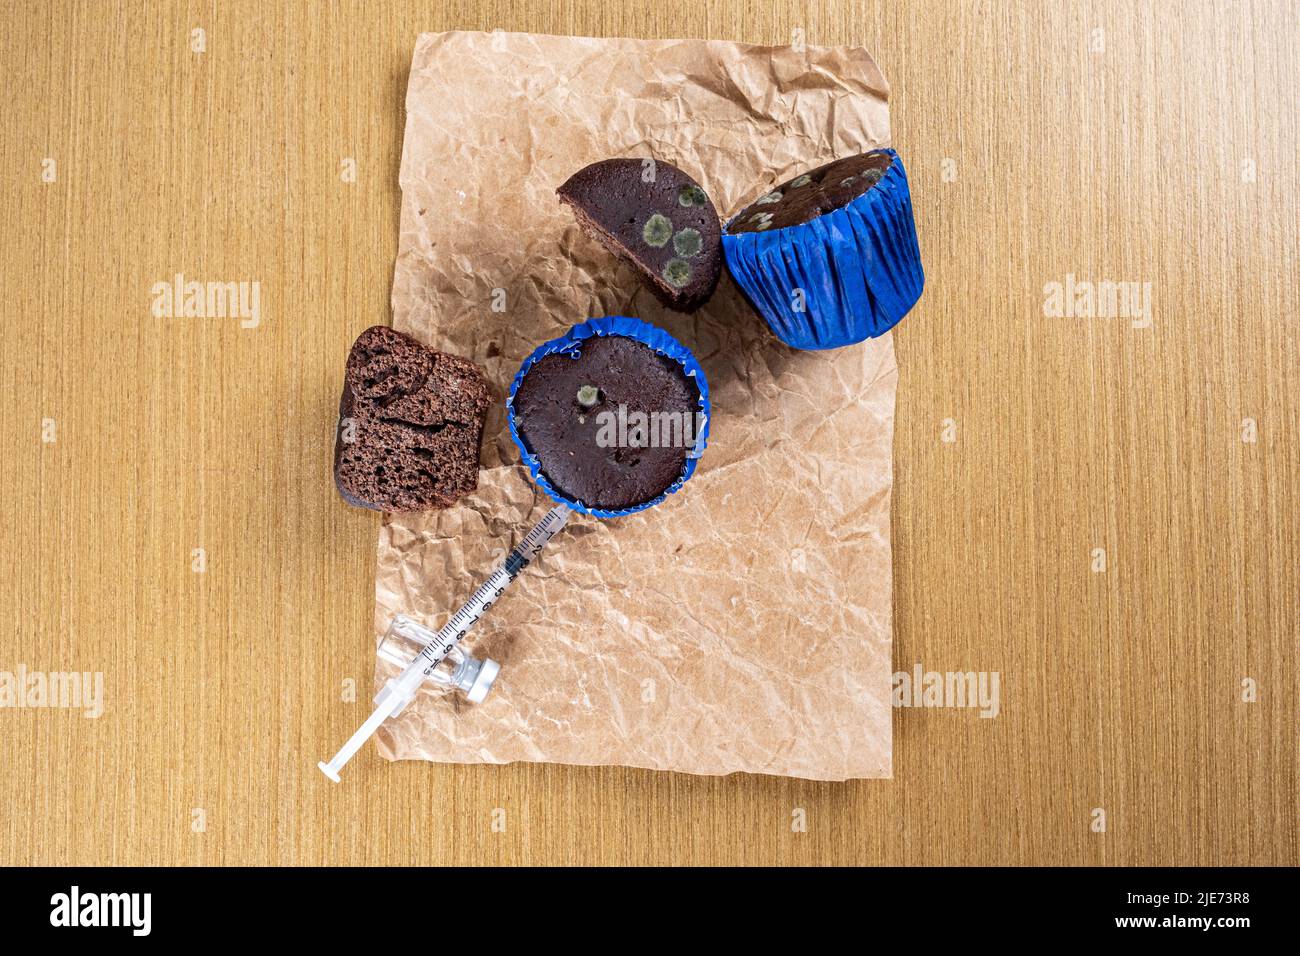 Syringe injecting insulin into moldy chocolate muffin top view. Stock Photo